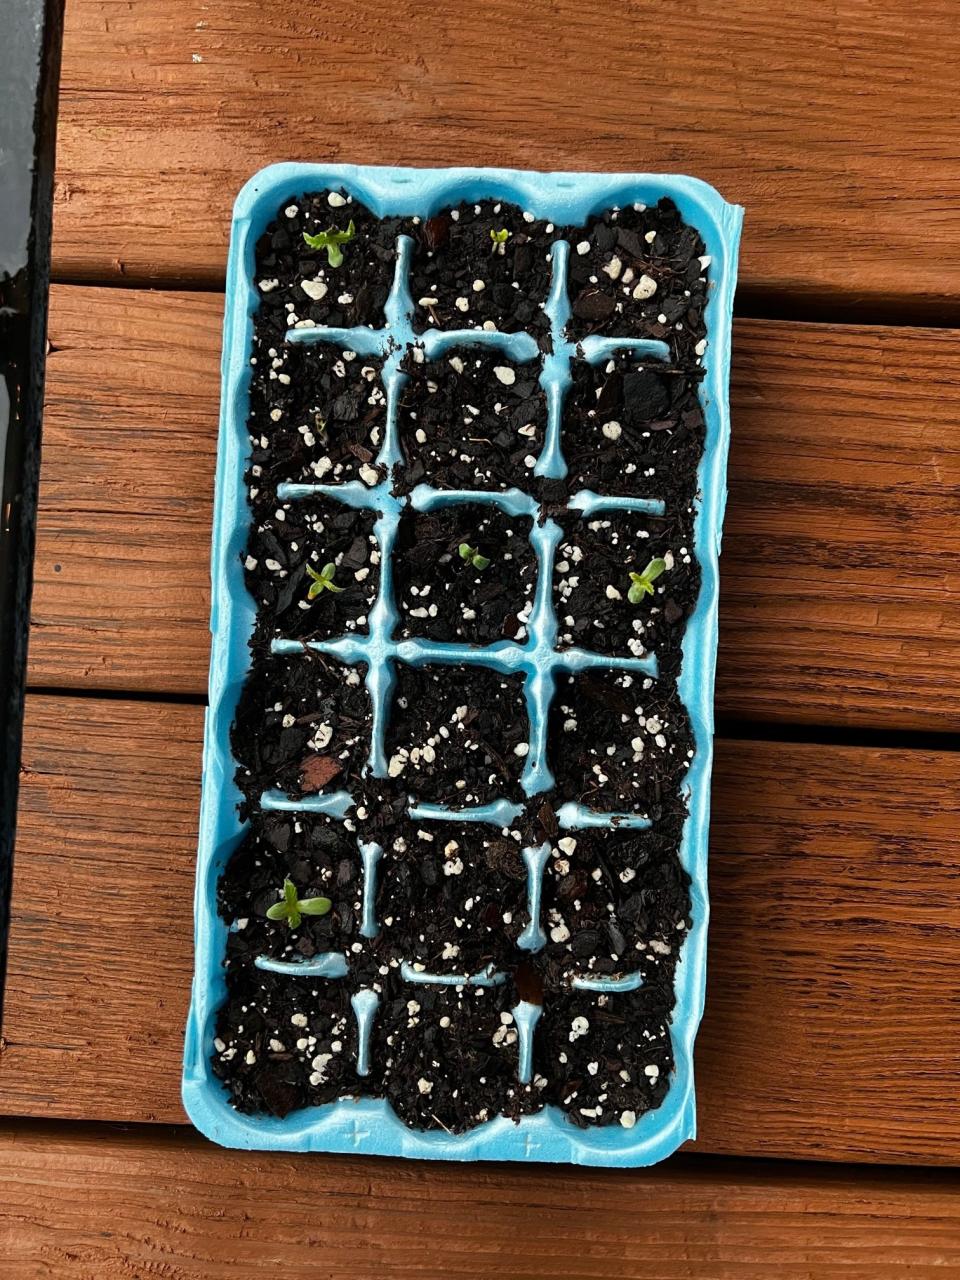 An egg carton holds 18 marijuana plant seeds, planted by Cecil Cornish. Cornish planted his first marijuana seeds in February 2022 and harvested from a total of four plants in October 2022. In total, Cornish harvested about four ounces of marijuana flower.